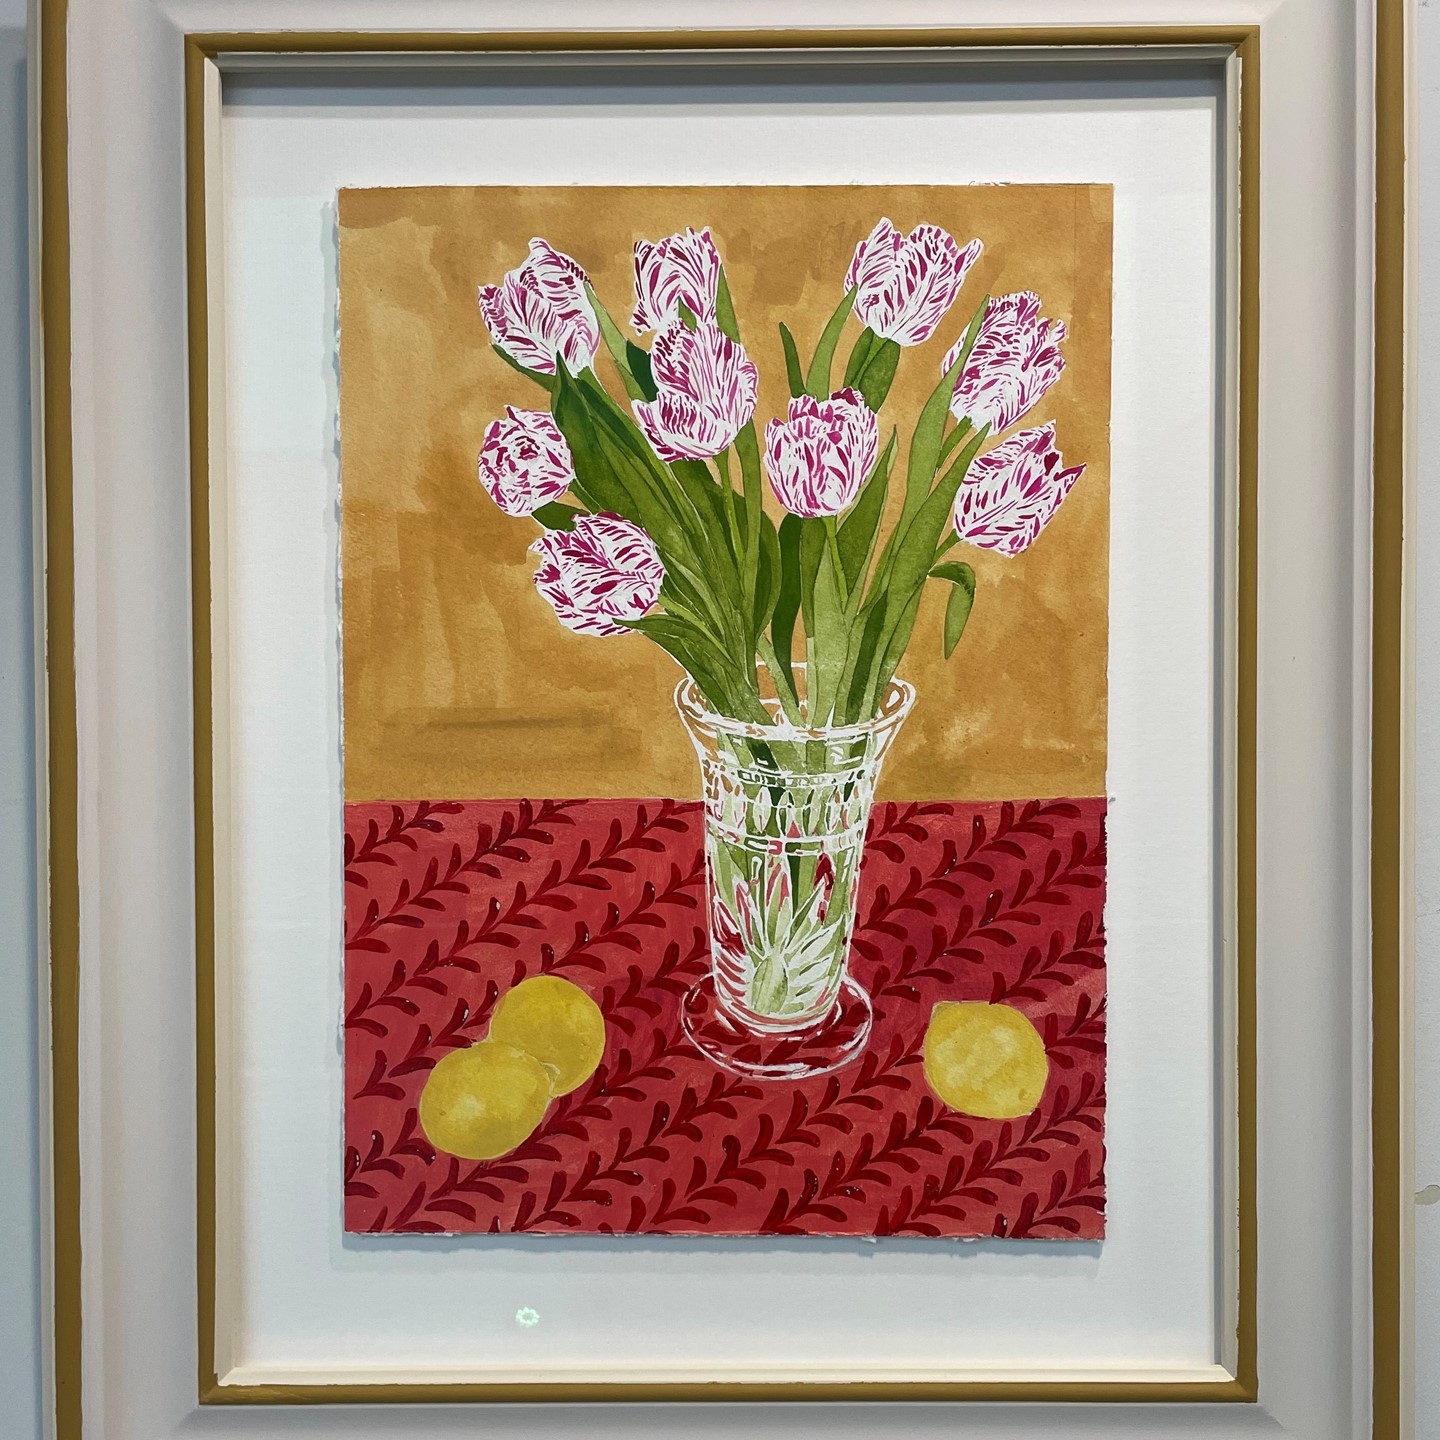 Sophie Roberts - Striped Flag Tulips on India Yellow